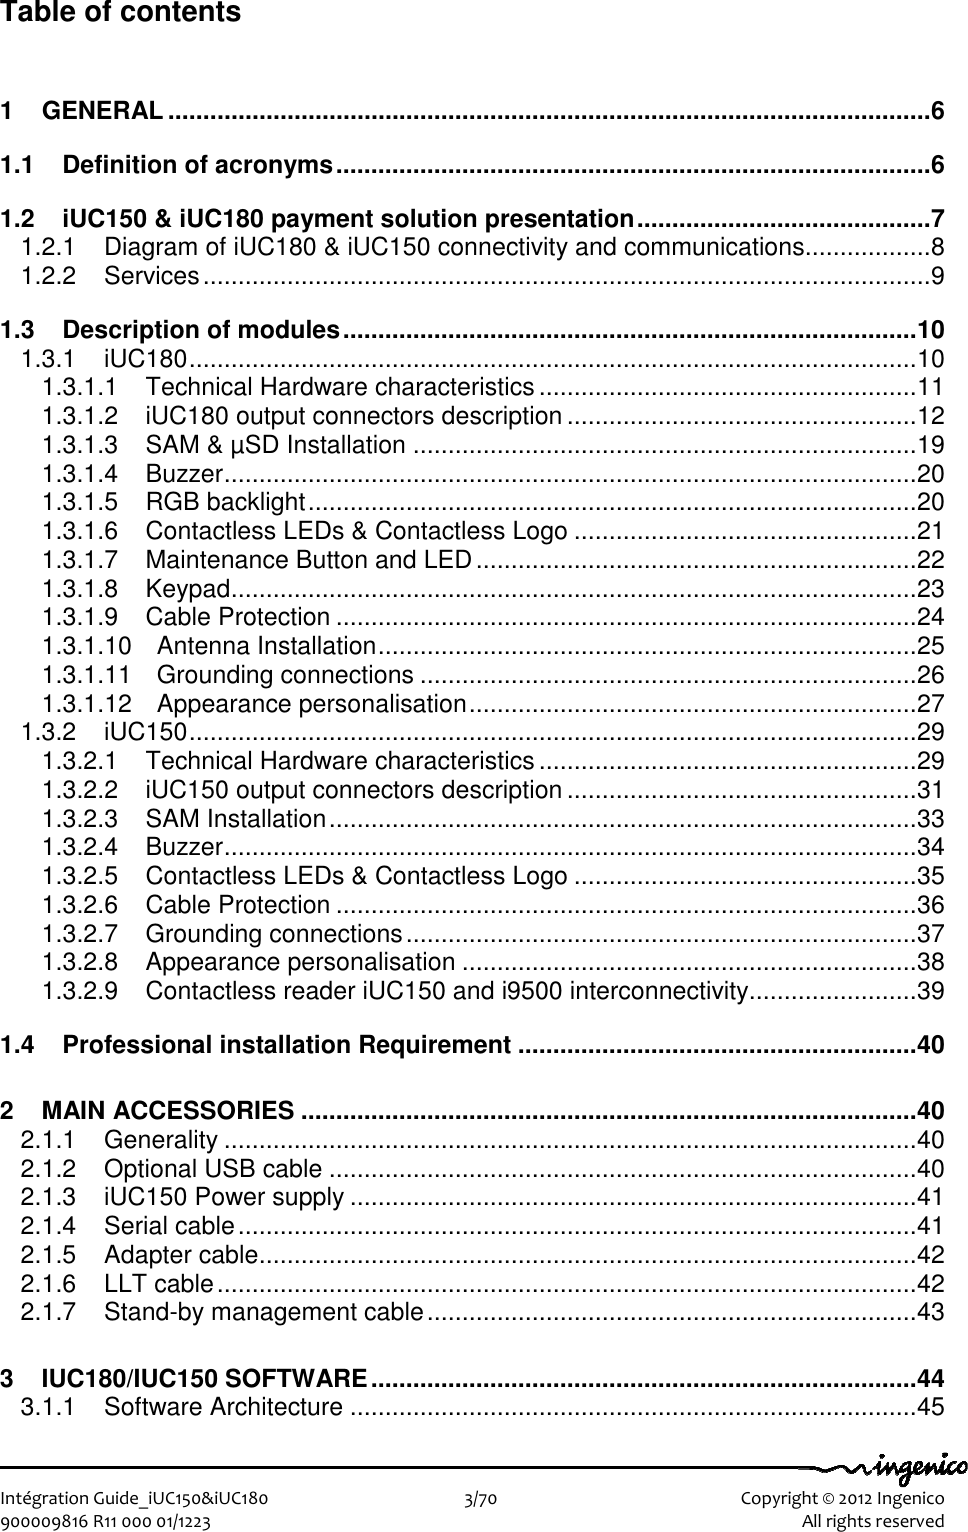   Intégration Guide_iUC150&amp;iUC180                        3/70    Copyright © 2012 Ingenico 900009816 R11 000 01/1223    All rights reserved Table of contents 1 GENERAL .............................................................................................................6 1.1 Definition of acronyms.....................................................................................6 1.2 iUC150 &amp; iUC180 payment solution presentation..........................................7 1.2.1 Diagram of iUC180 &amp; iUC150 connectivity and communications..................8 1.2.2 Services........................................................................................................9 1.3 Description of modules..................................................................................10 1.3.1 iUC180........................................................................................................10 1.3.1.1 Technical Hardware characteristics ......................................................11 1.3.1.2 iUC180 output connectors description ..................................................12 1.3.1.3 SAM &amp; µSD Installation ........................................................................19 1.3.1.4 Buzzer...................................................................................................20 1.3.1.5 RGB backlight.......................................................................................20 1.3.1.6 Contactless LEDs &amp; Contactless Logo .................................................21 1.3.1.7 Maintenance Button and LED...............................................................22 1.3.1.8 Keypad..................................................................................................23 1.3.1.9 Cable Protection ...................................................................................24 1.3.1.10 Antenna Installation.............................................................................25 1.3.1.11 Grounding connections .......................................................................26 1.3.1.12 Appearance personalisation................................................................27 1.3.2 iUC150........................................................................................................29 1.3.2.1 Technical Hardware characteristics ......................................................29 1.3.2.2 iUC150 output connectors description ..................................................31 1.3.2.3 SAM Installation....................................................................................33 1.3.2.4 Buzzer...................................................................................................34 1.3.2.5 Contactless LEDs &amp; Contactless Logo .................................................35 1.3.2.6 Cable Protection ...................................................................................36 1.3.2.7 Grounding connections.........................................................................37 1.3.2.8 Appearance personalisation .................................................................38 1.3.2.9 Contactless reader iUC150 and i9500 interconnectivity........................39 1.4 Professional installation Requirement .........................................................40 2 MAIN ACCESSORIES ........................................................................................40 2.1.1 Generality ...................................................................................................40 2.1.2 Optional USB cable ....................................................................................40 2.1.3 iUC150 Power supply .................................................................................41 2.1.4 Serial cable.................................................................................................41 2.1.5 Adapter cable..............................................................................................42 2.1.6 LLT cable....................................................................................................42 2.1.7 Stand-by management cable......................................................................43 3 IUC180/IUC150 SOFTWARE..............................................................................44 3.1.1 Software Architecture .................................................................................45 